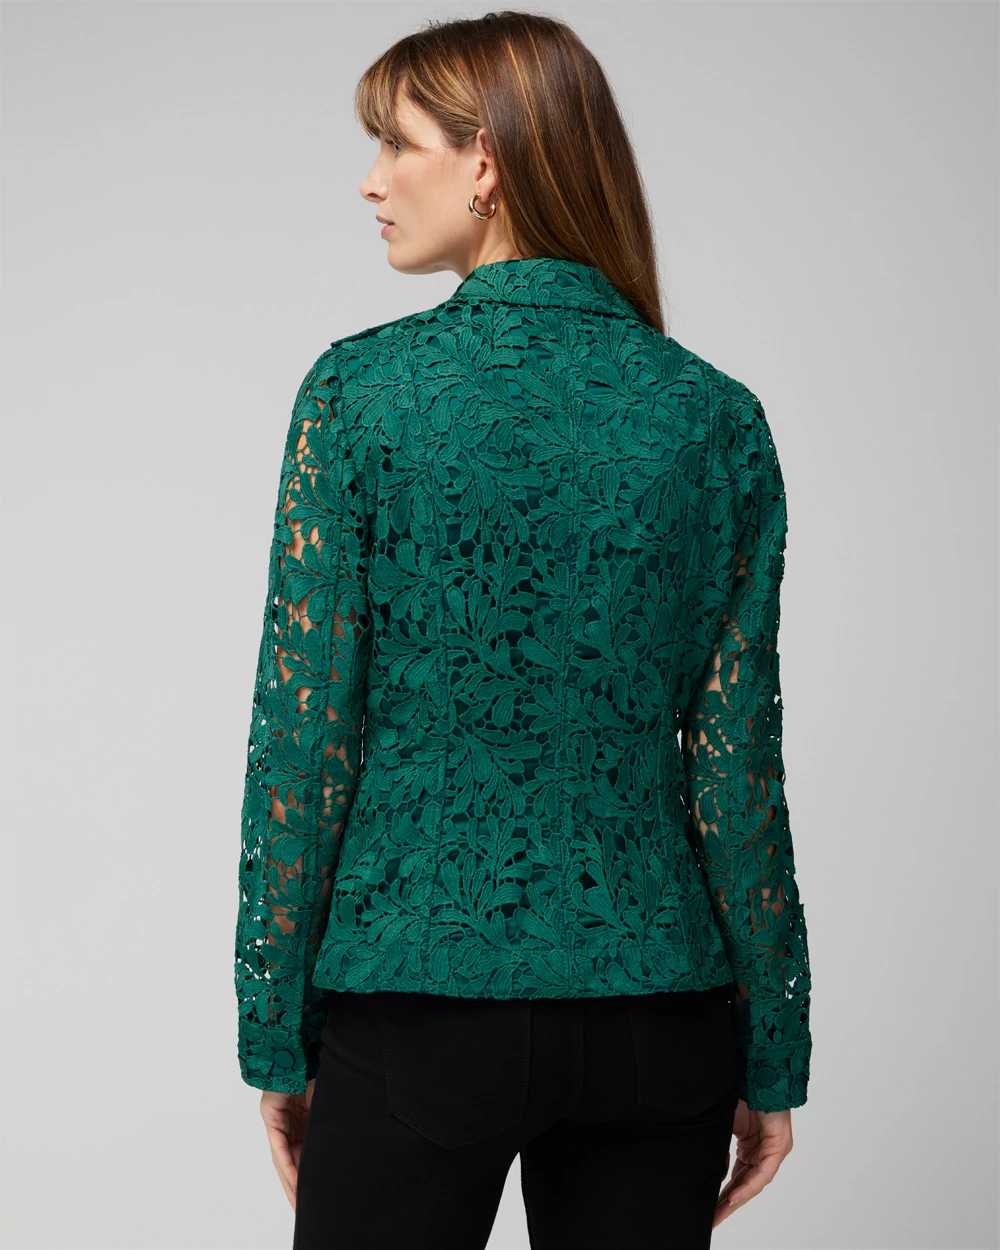 Lace Pocket Jacket click to view larger image.